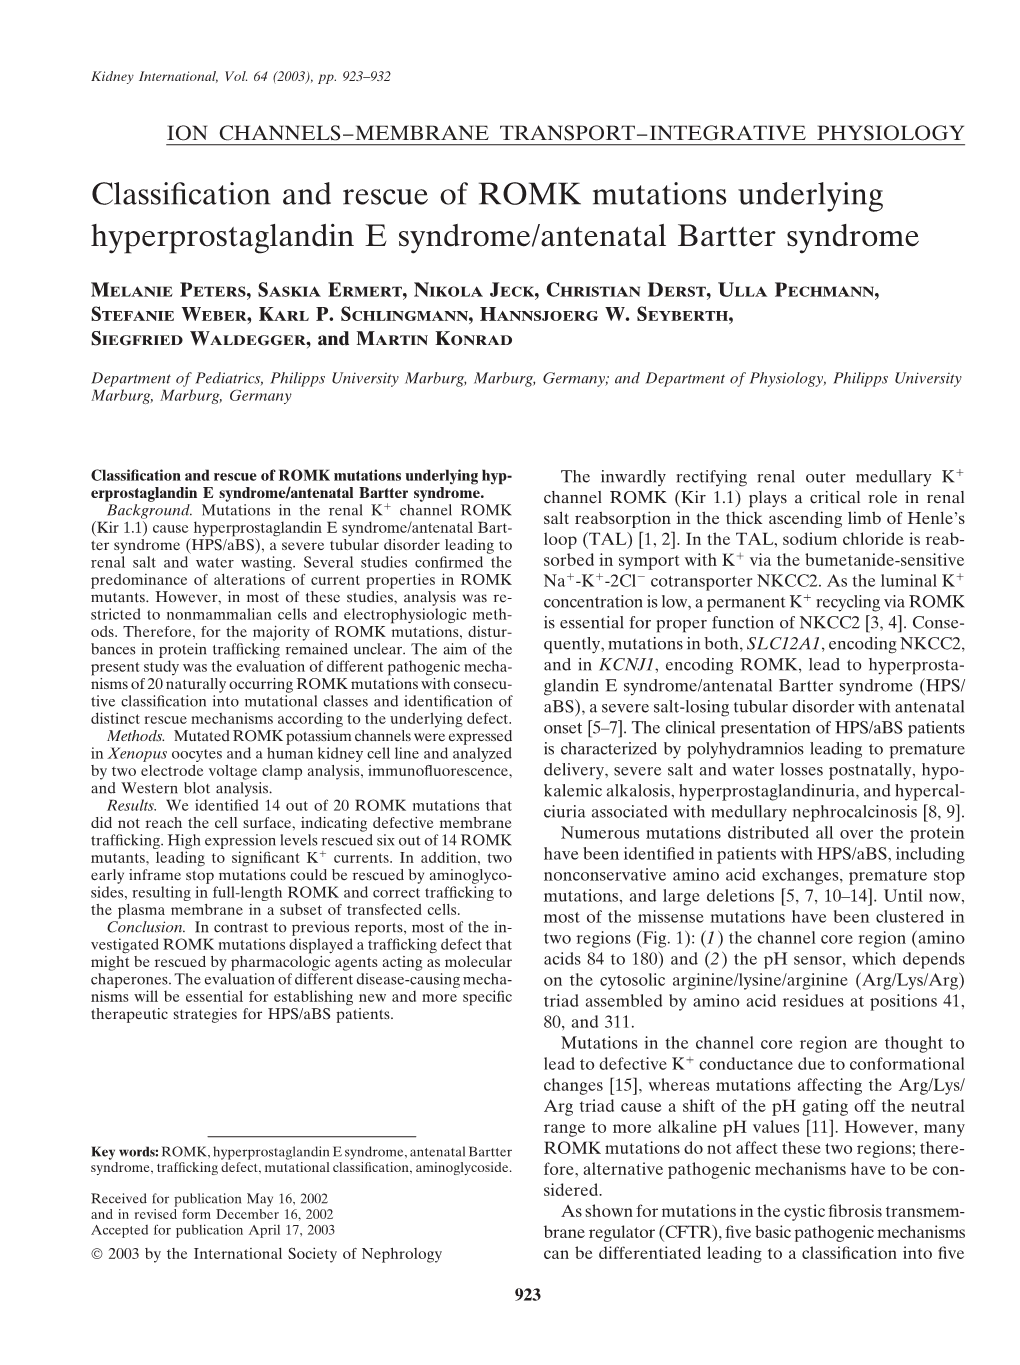 Classification and Rescue of ROMK Mutations Underlying